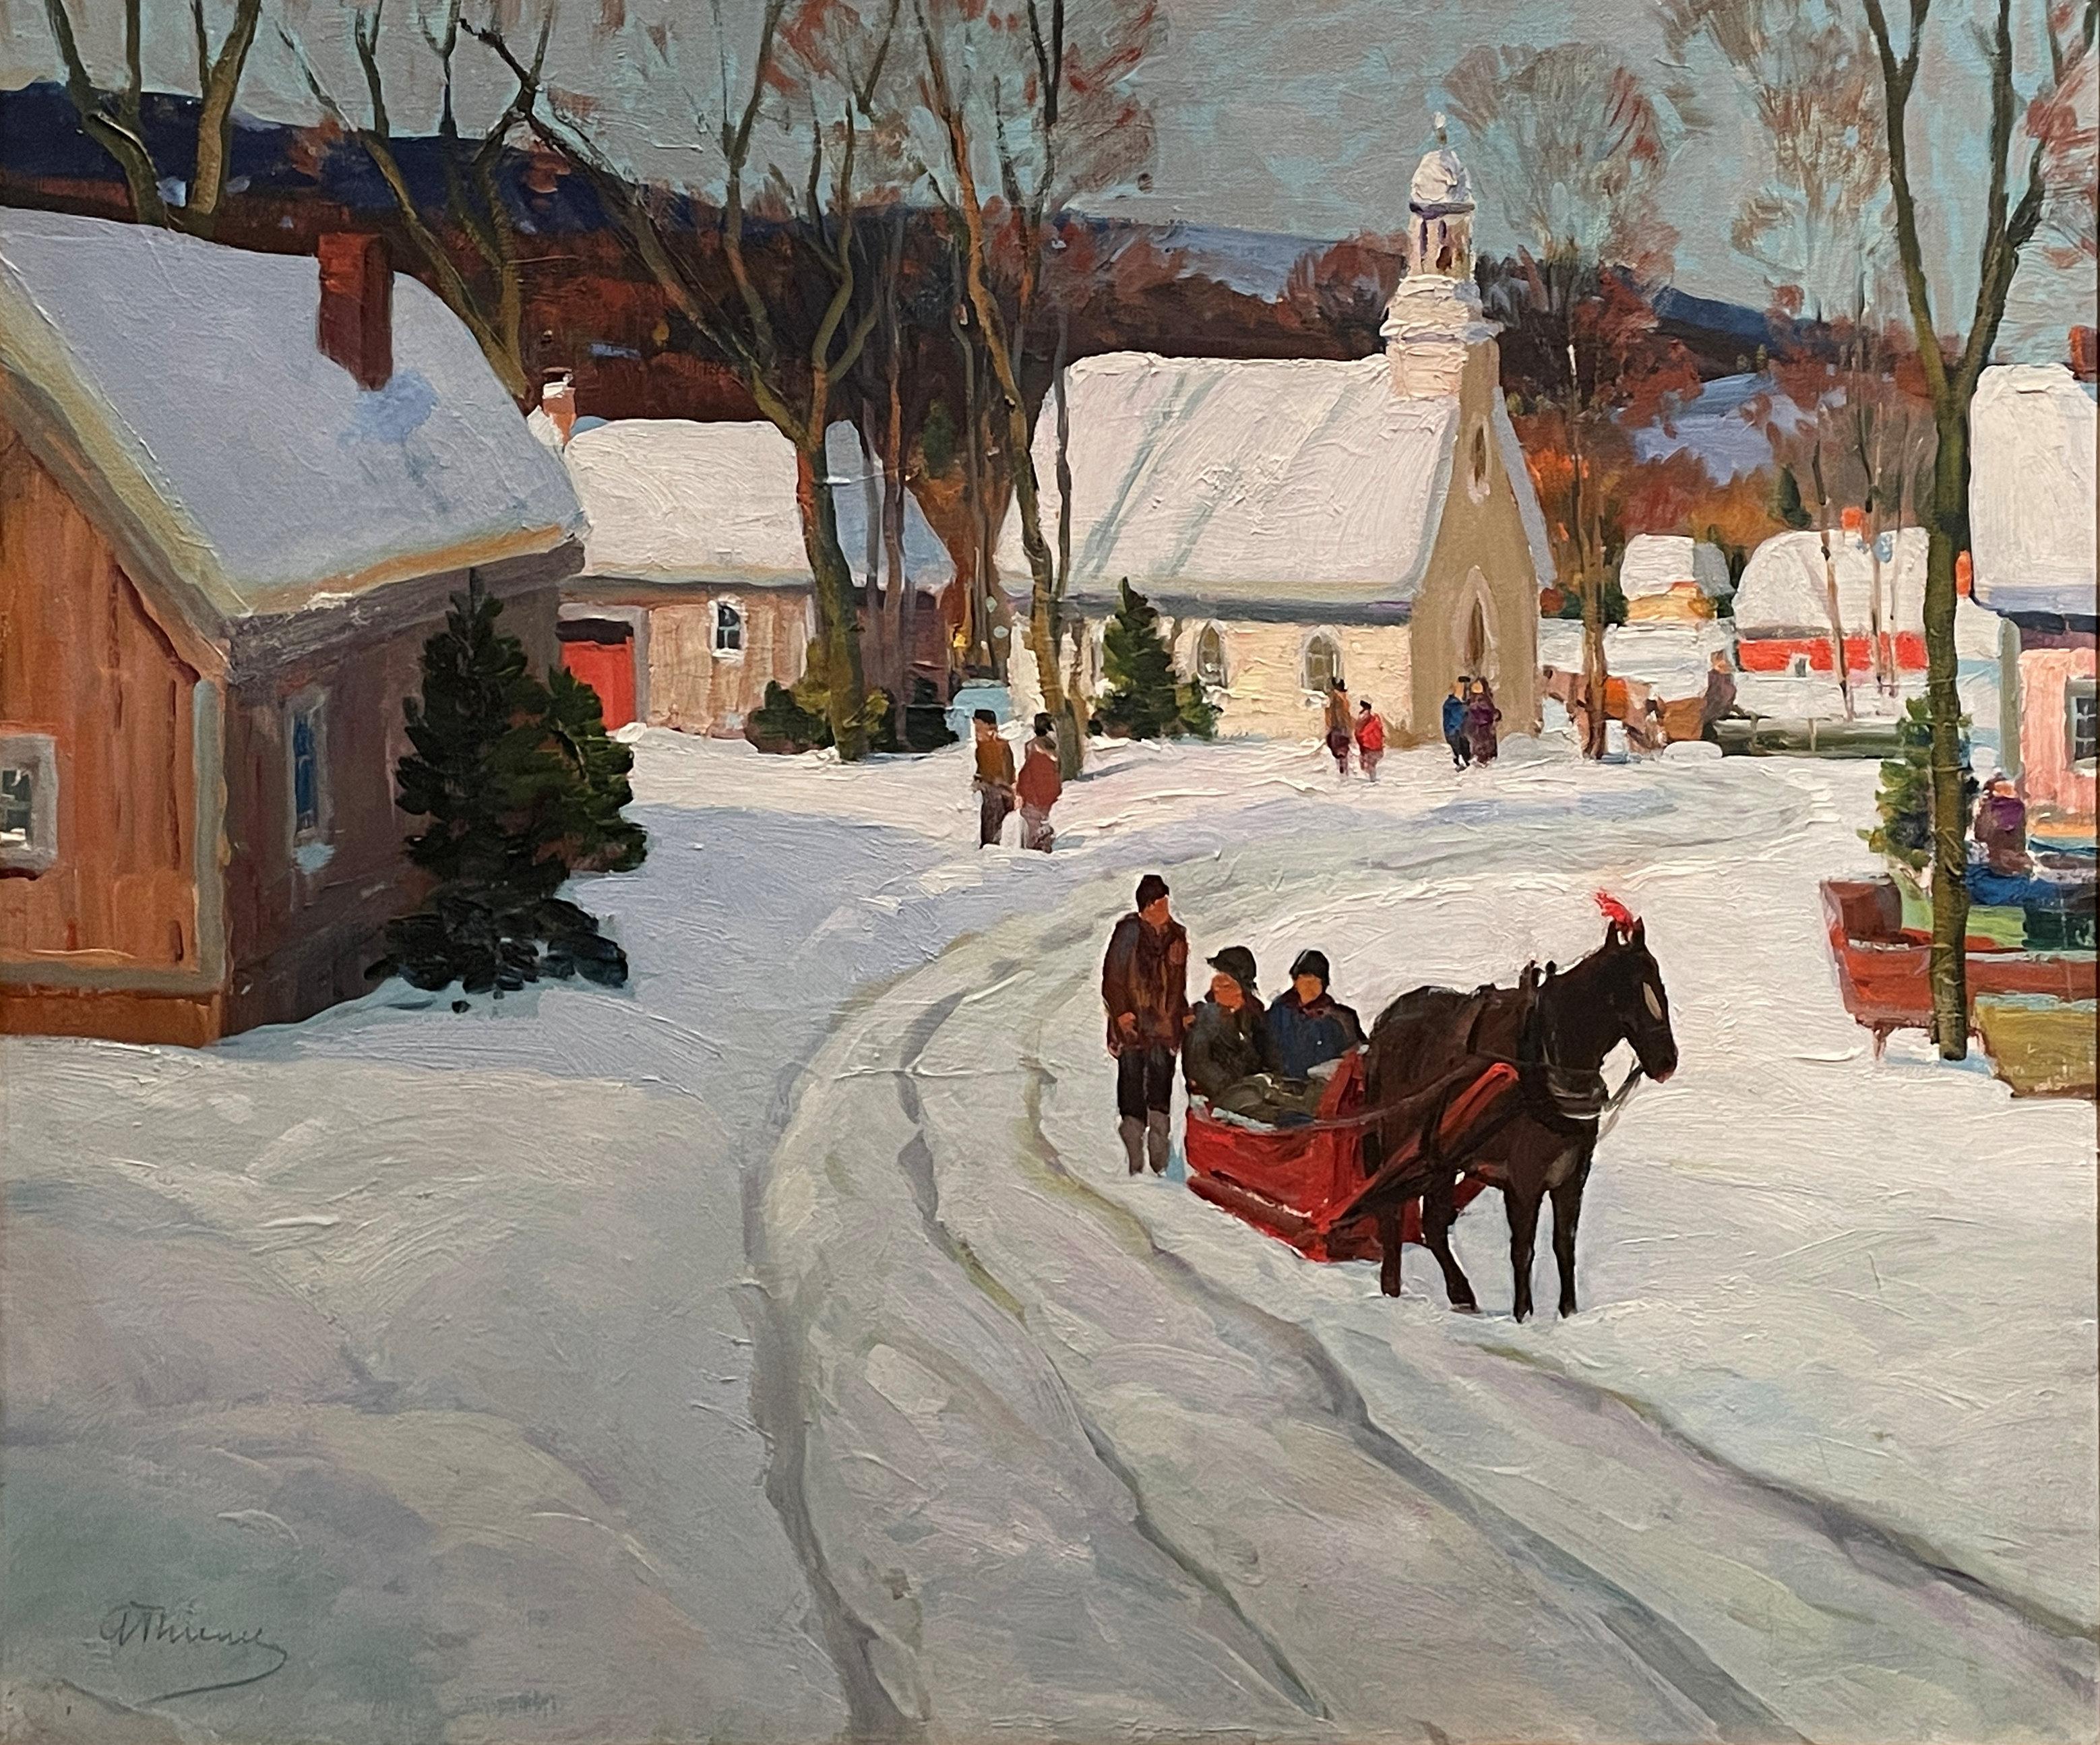 Anthony Thieme
Mountain Village in Winter
Signed lower left
Oil on canvas
25 x 30 inches

Anthony Thieme was born in the Dutch port city of Rotterdam in 1888. He studied at the Academy of Fine Arts in Rotterdam, at the Royal Academy at the Hague, as